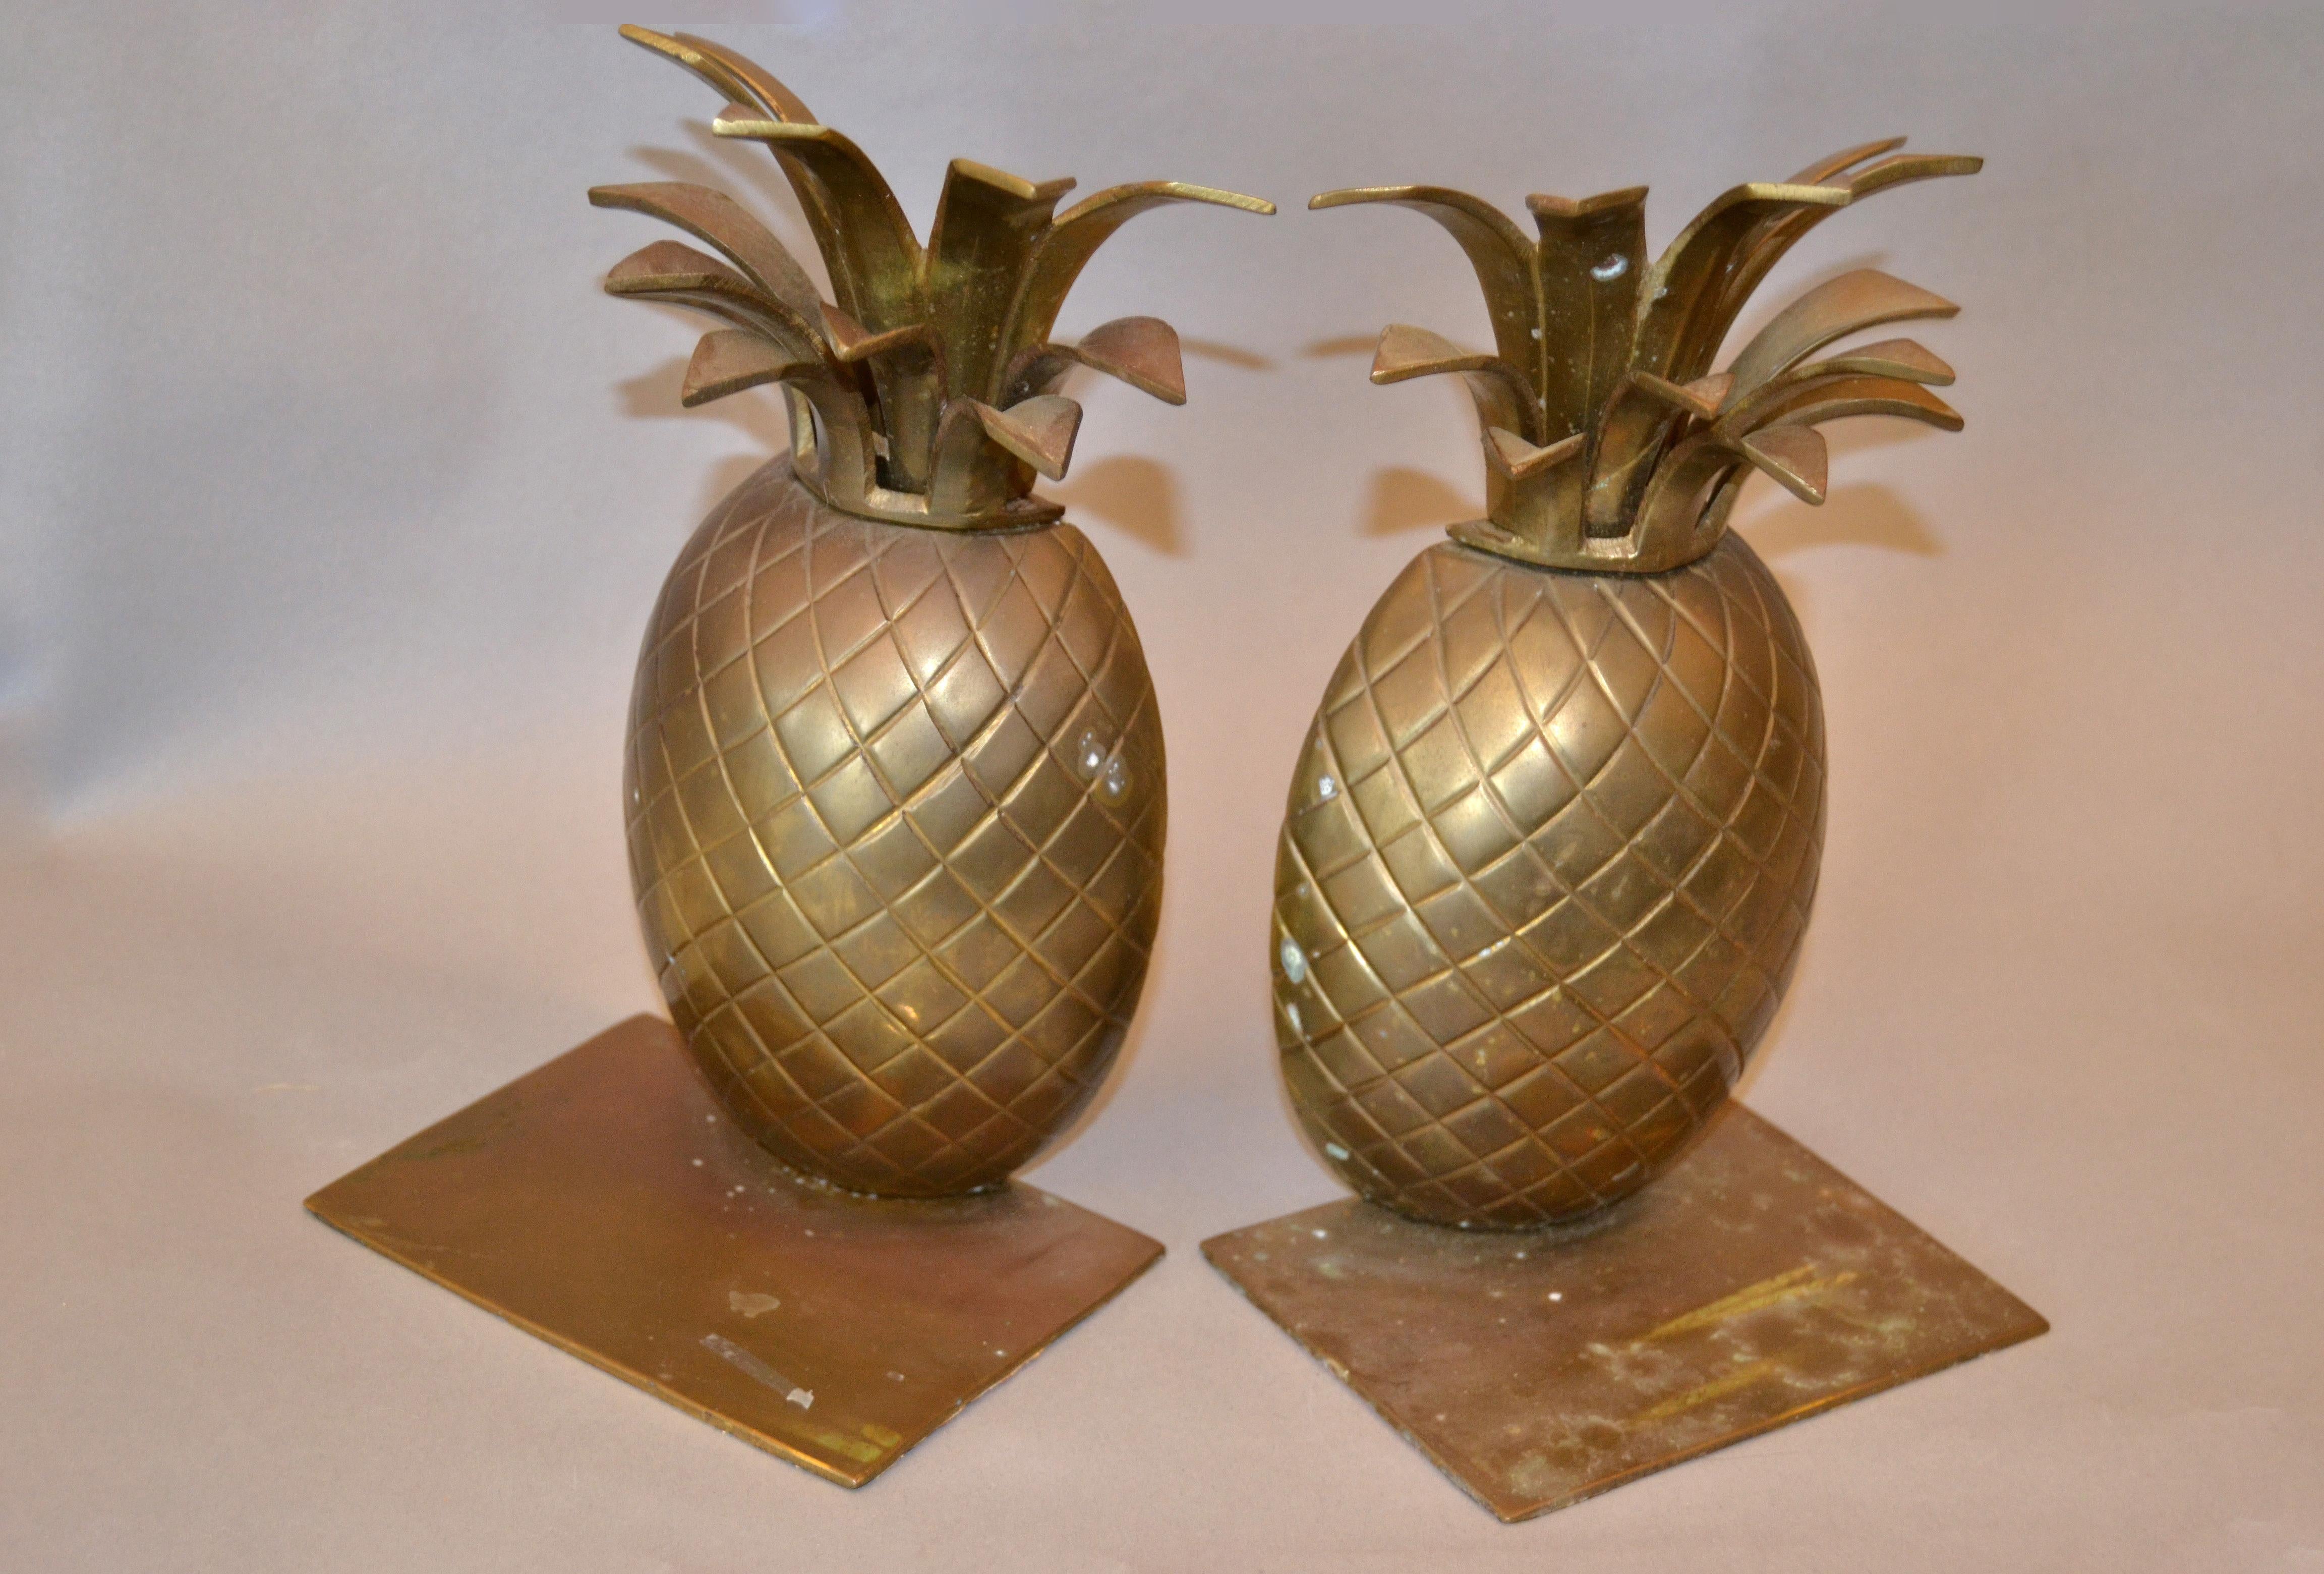 Late 20th Century Mid-Century Modern Handcrafted Bronze Pineapple Bookends